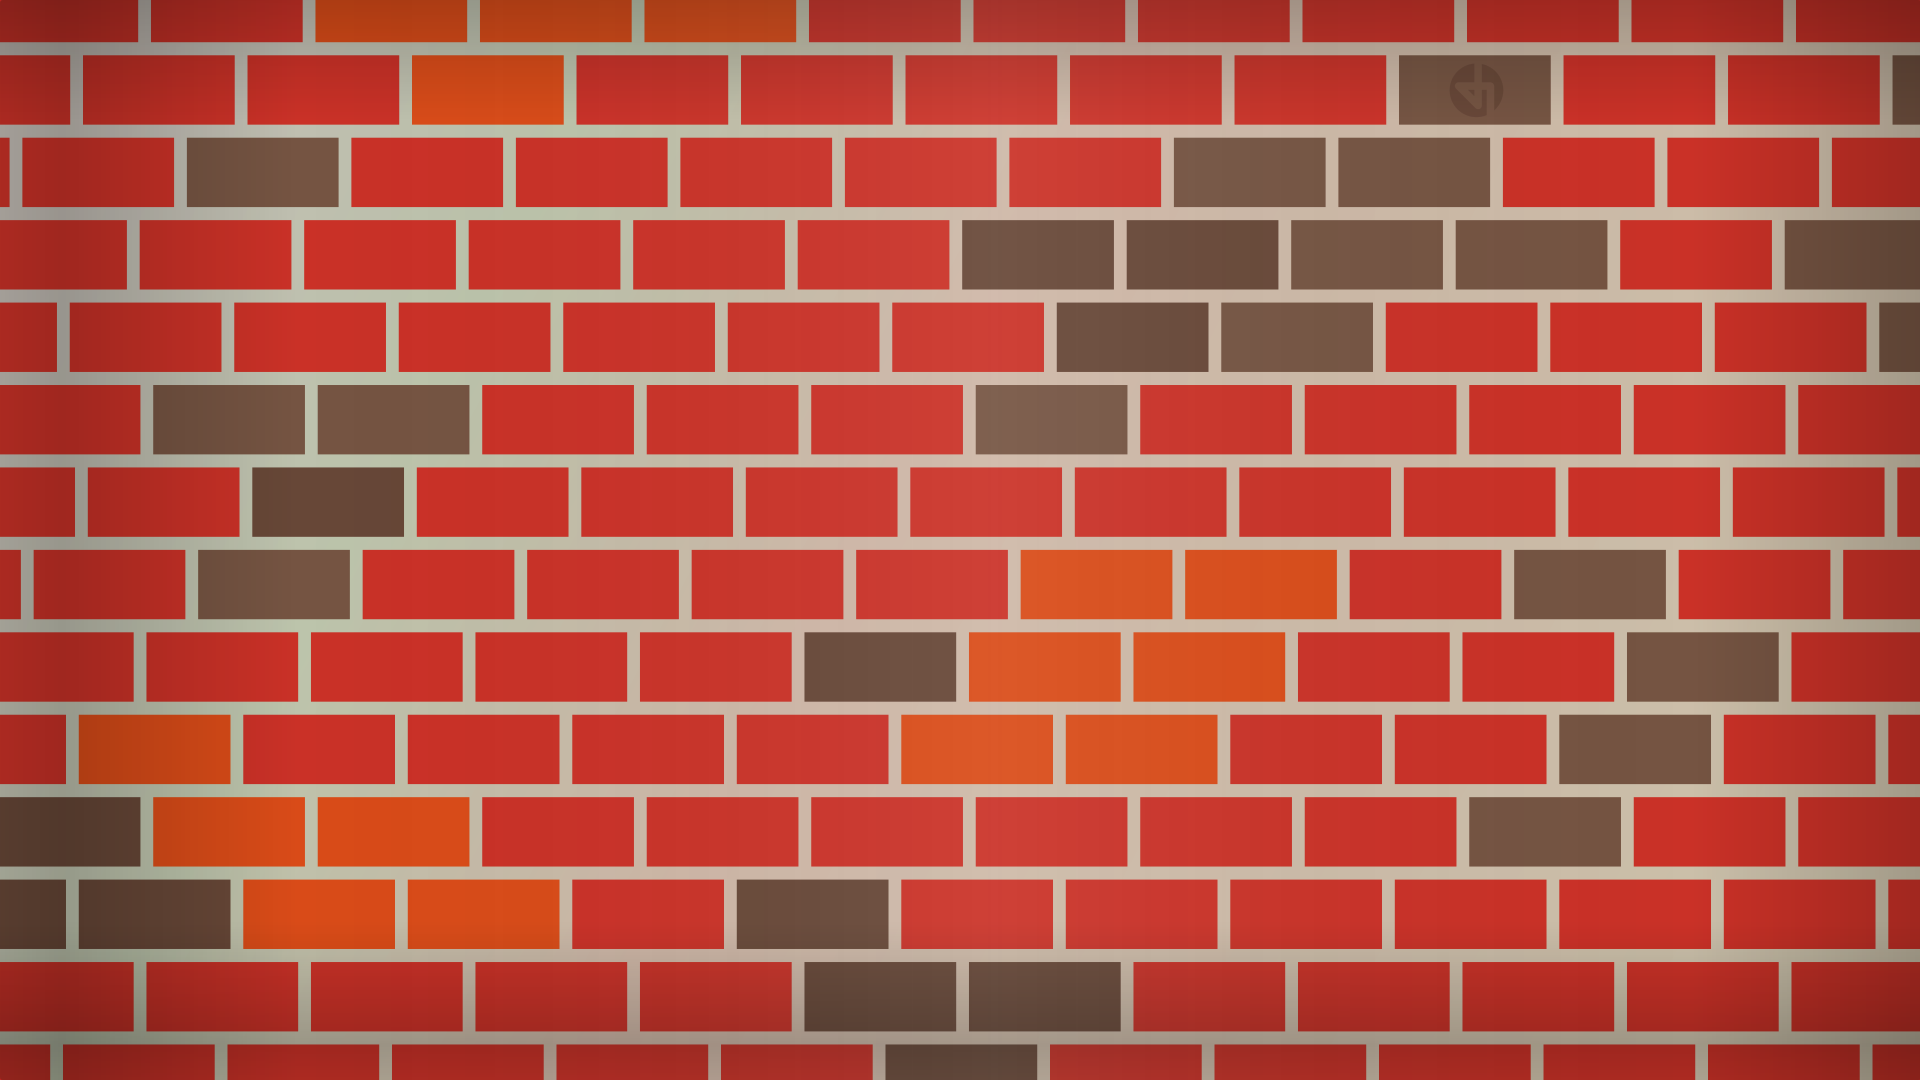 A brick wall designed in Inkscape.